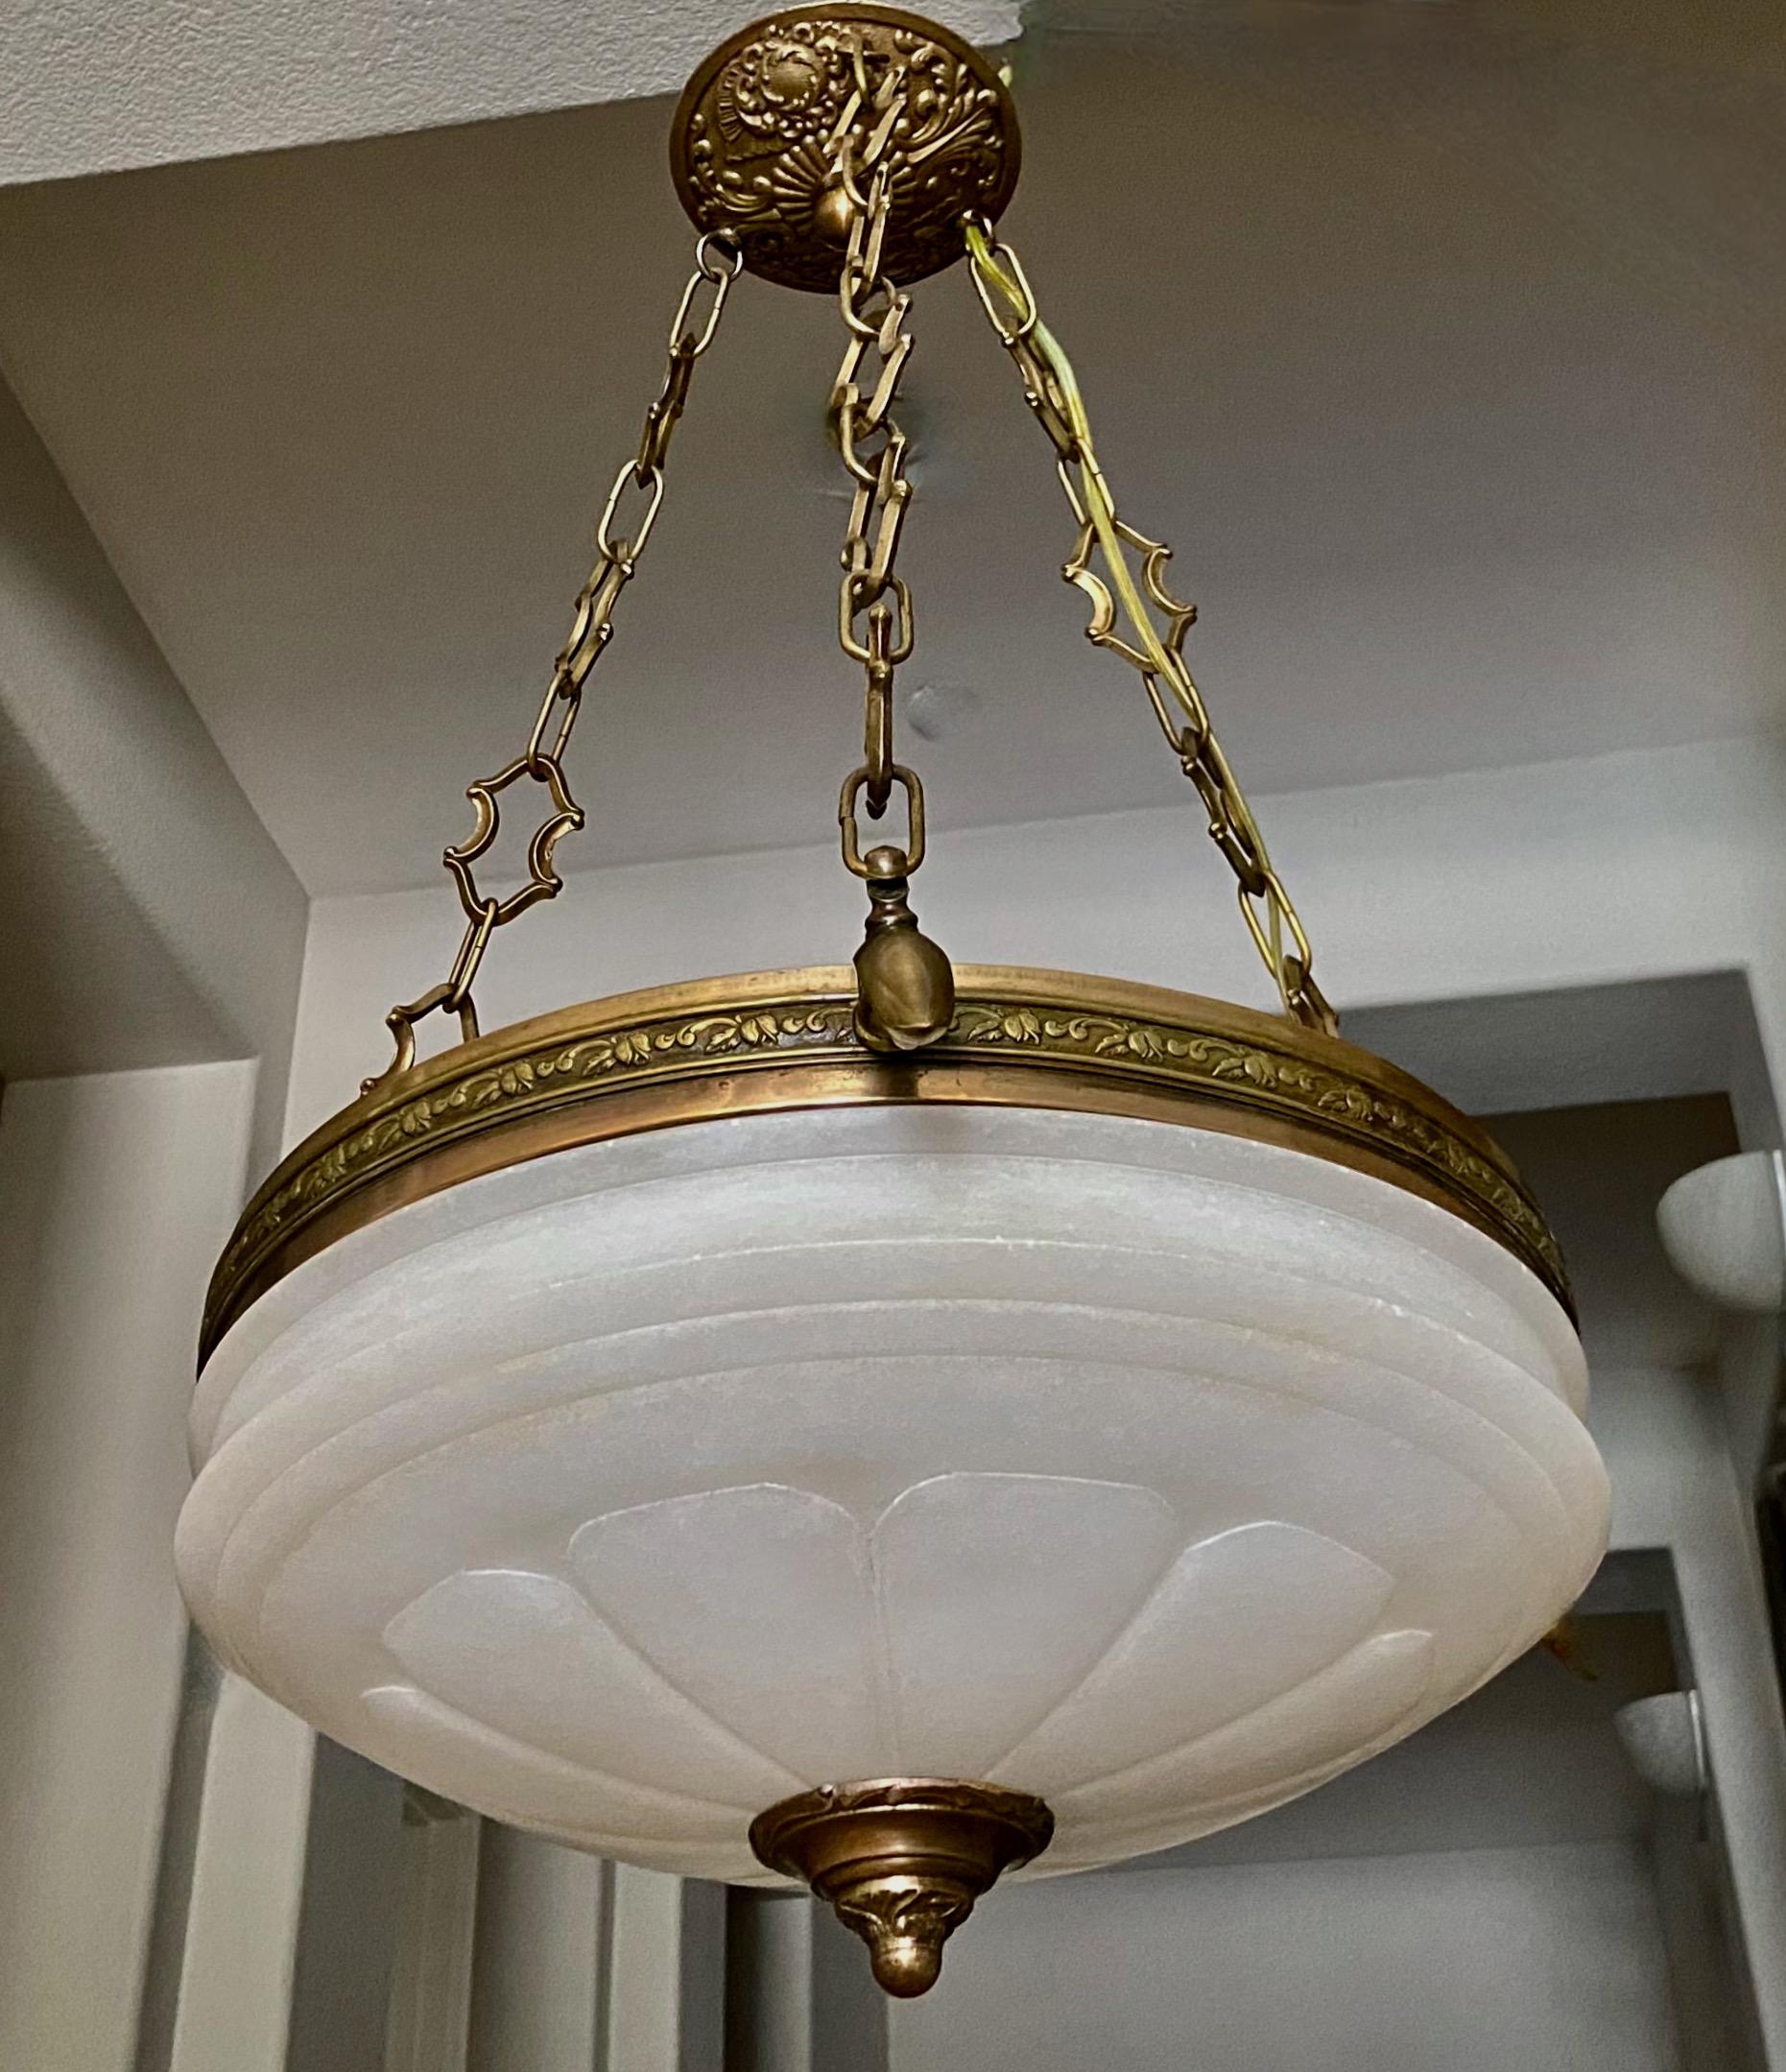 Carved alabaster pendant light or chandelier with aged patinated brass fittings in the Directoire style. Wired for US, fixture uses three candelabra or 